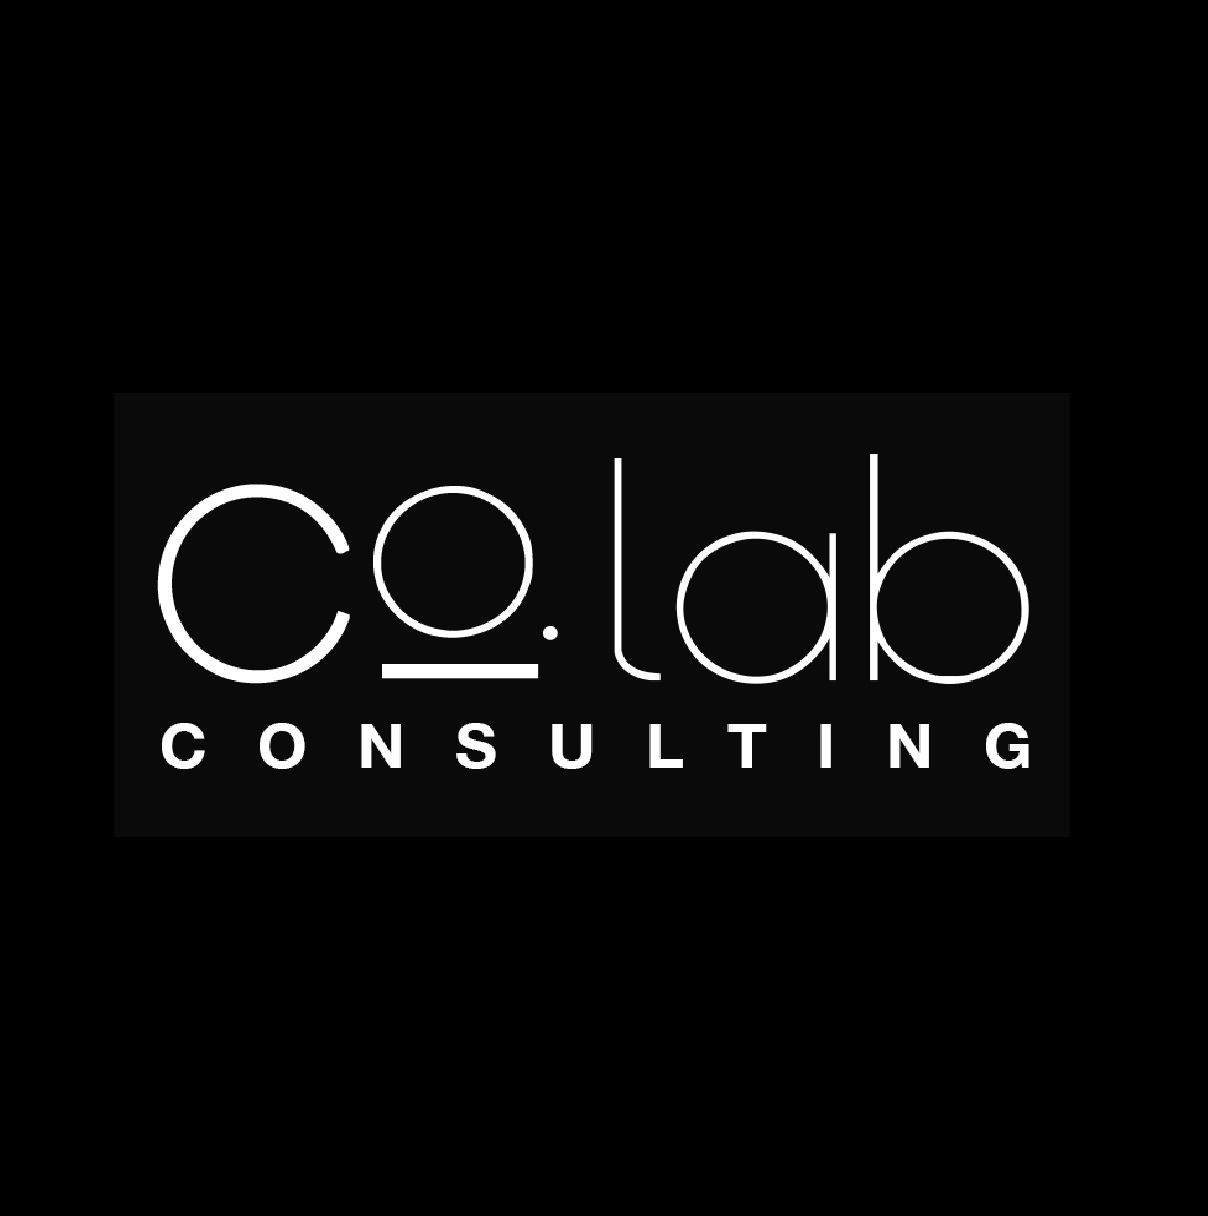 Co-lab consulting